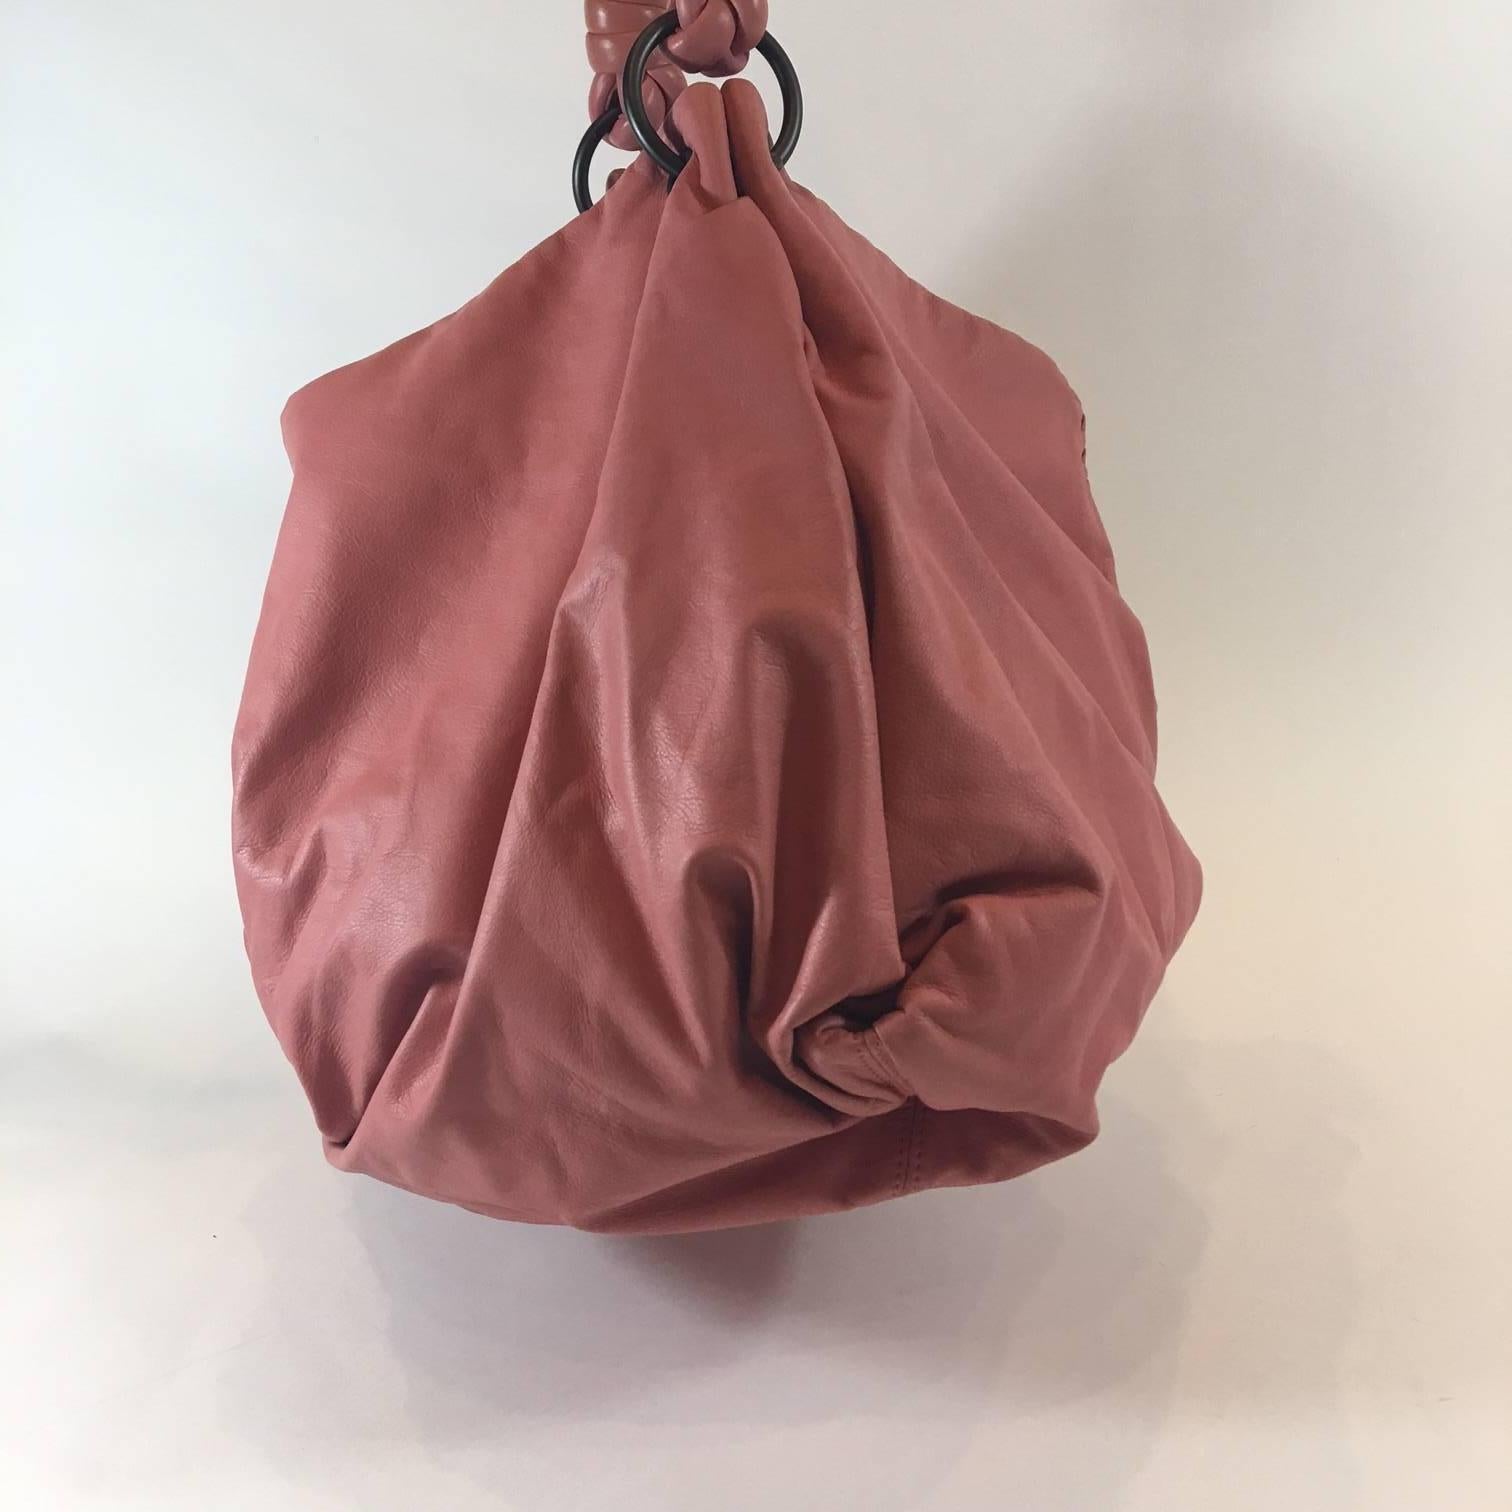 This soft and luxurious Bottega Veneta bag is known as the Petal Woven Leather Aquilone Fortune Cookie Hobo Bag. Made in Italy and featuring Bottega's signature intrecciato woven leather details in a pale pink 